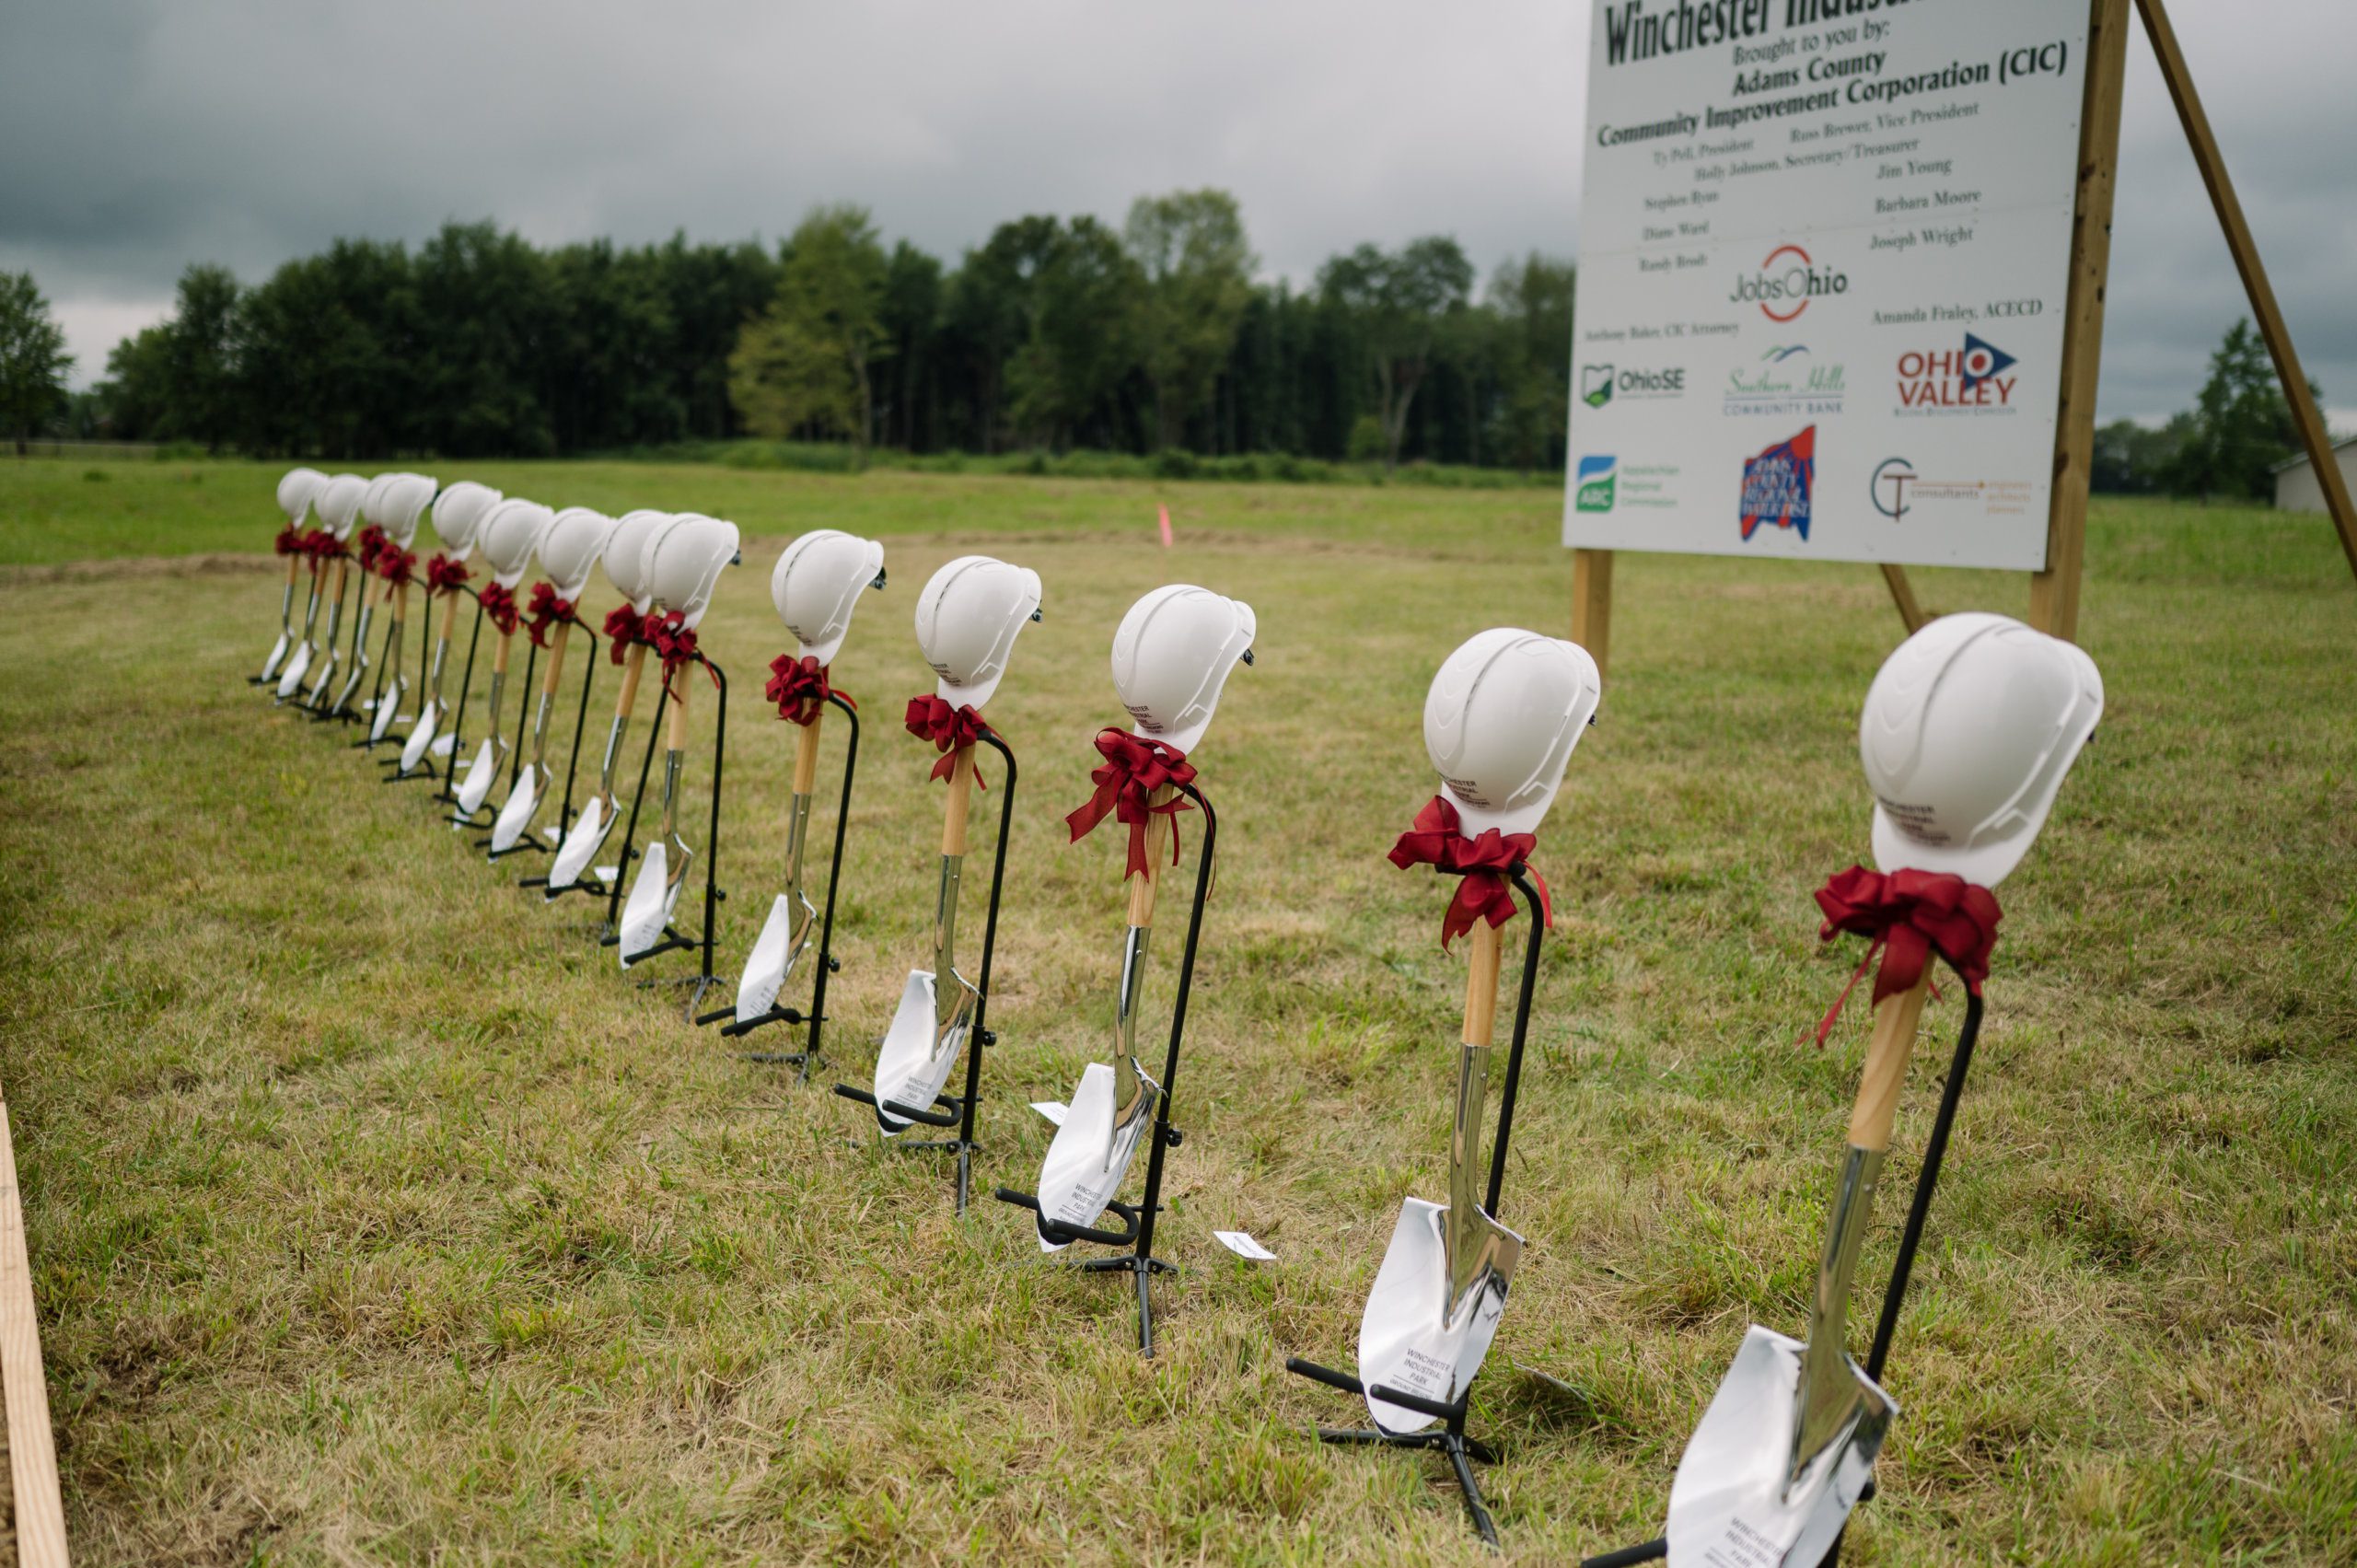 Adams County Community Improvement Corporation (CIC) Breaks Ground at Winchester Industrial Park